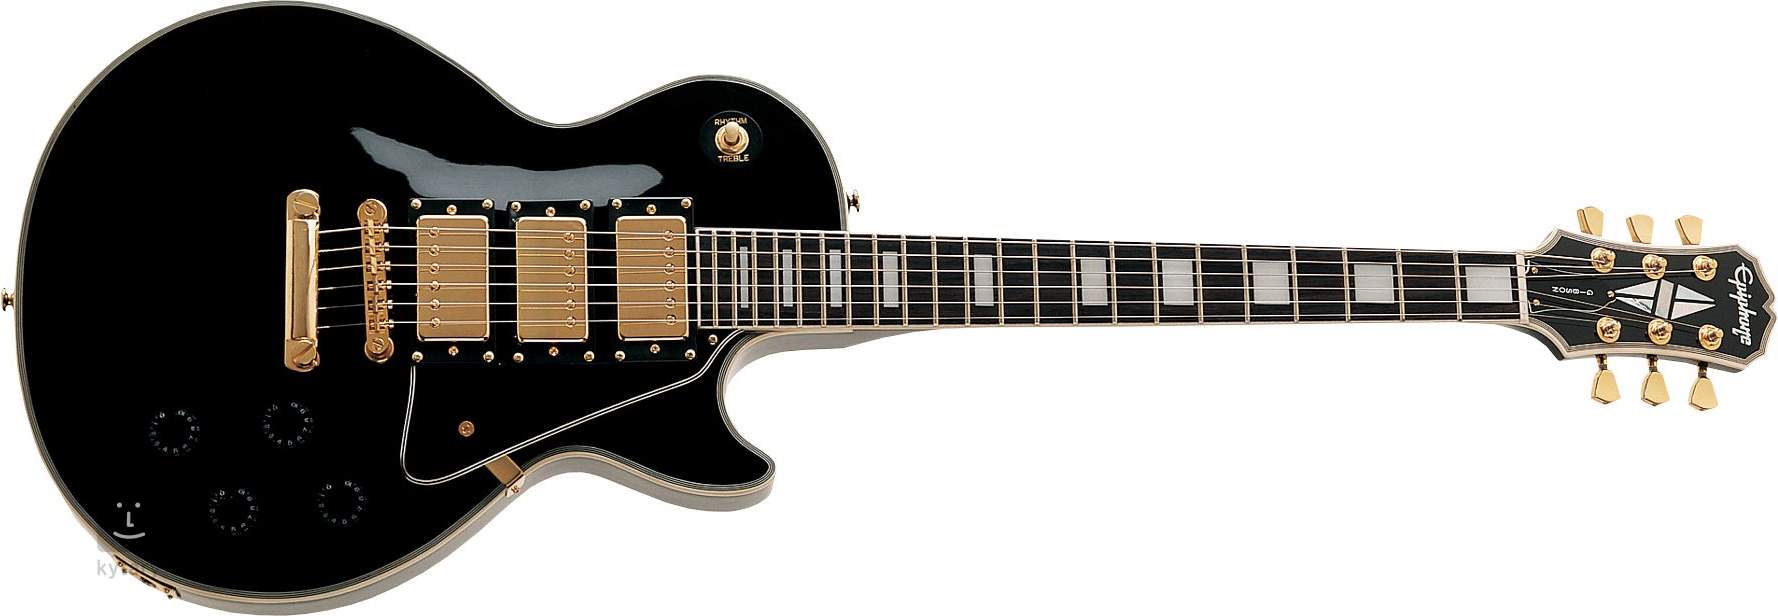 EPIPHONE Les Paul Black Beauty 3 EB Electric Guitar | Kytary.ie